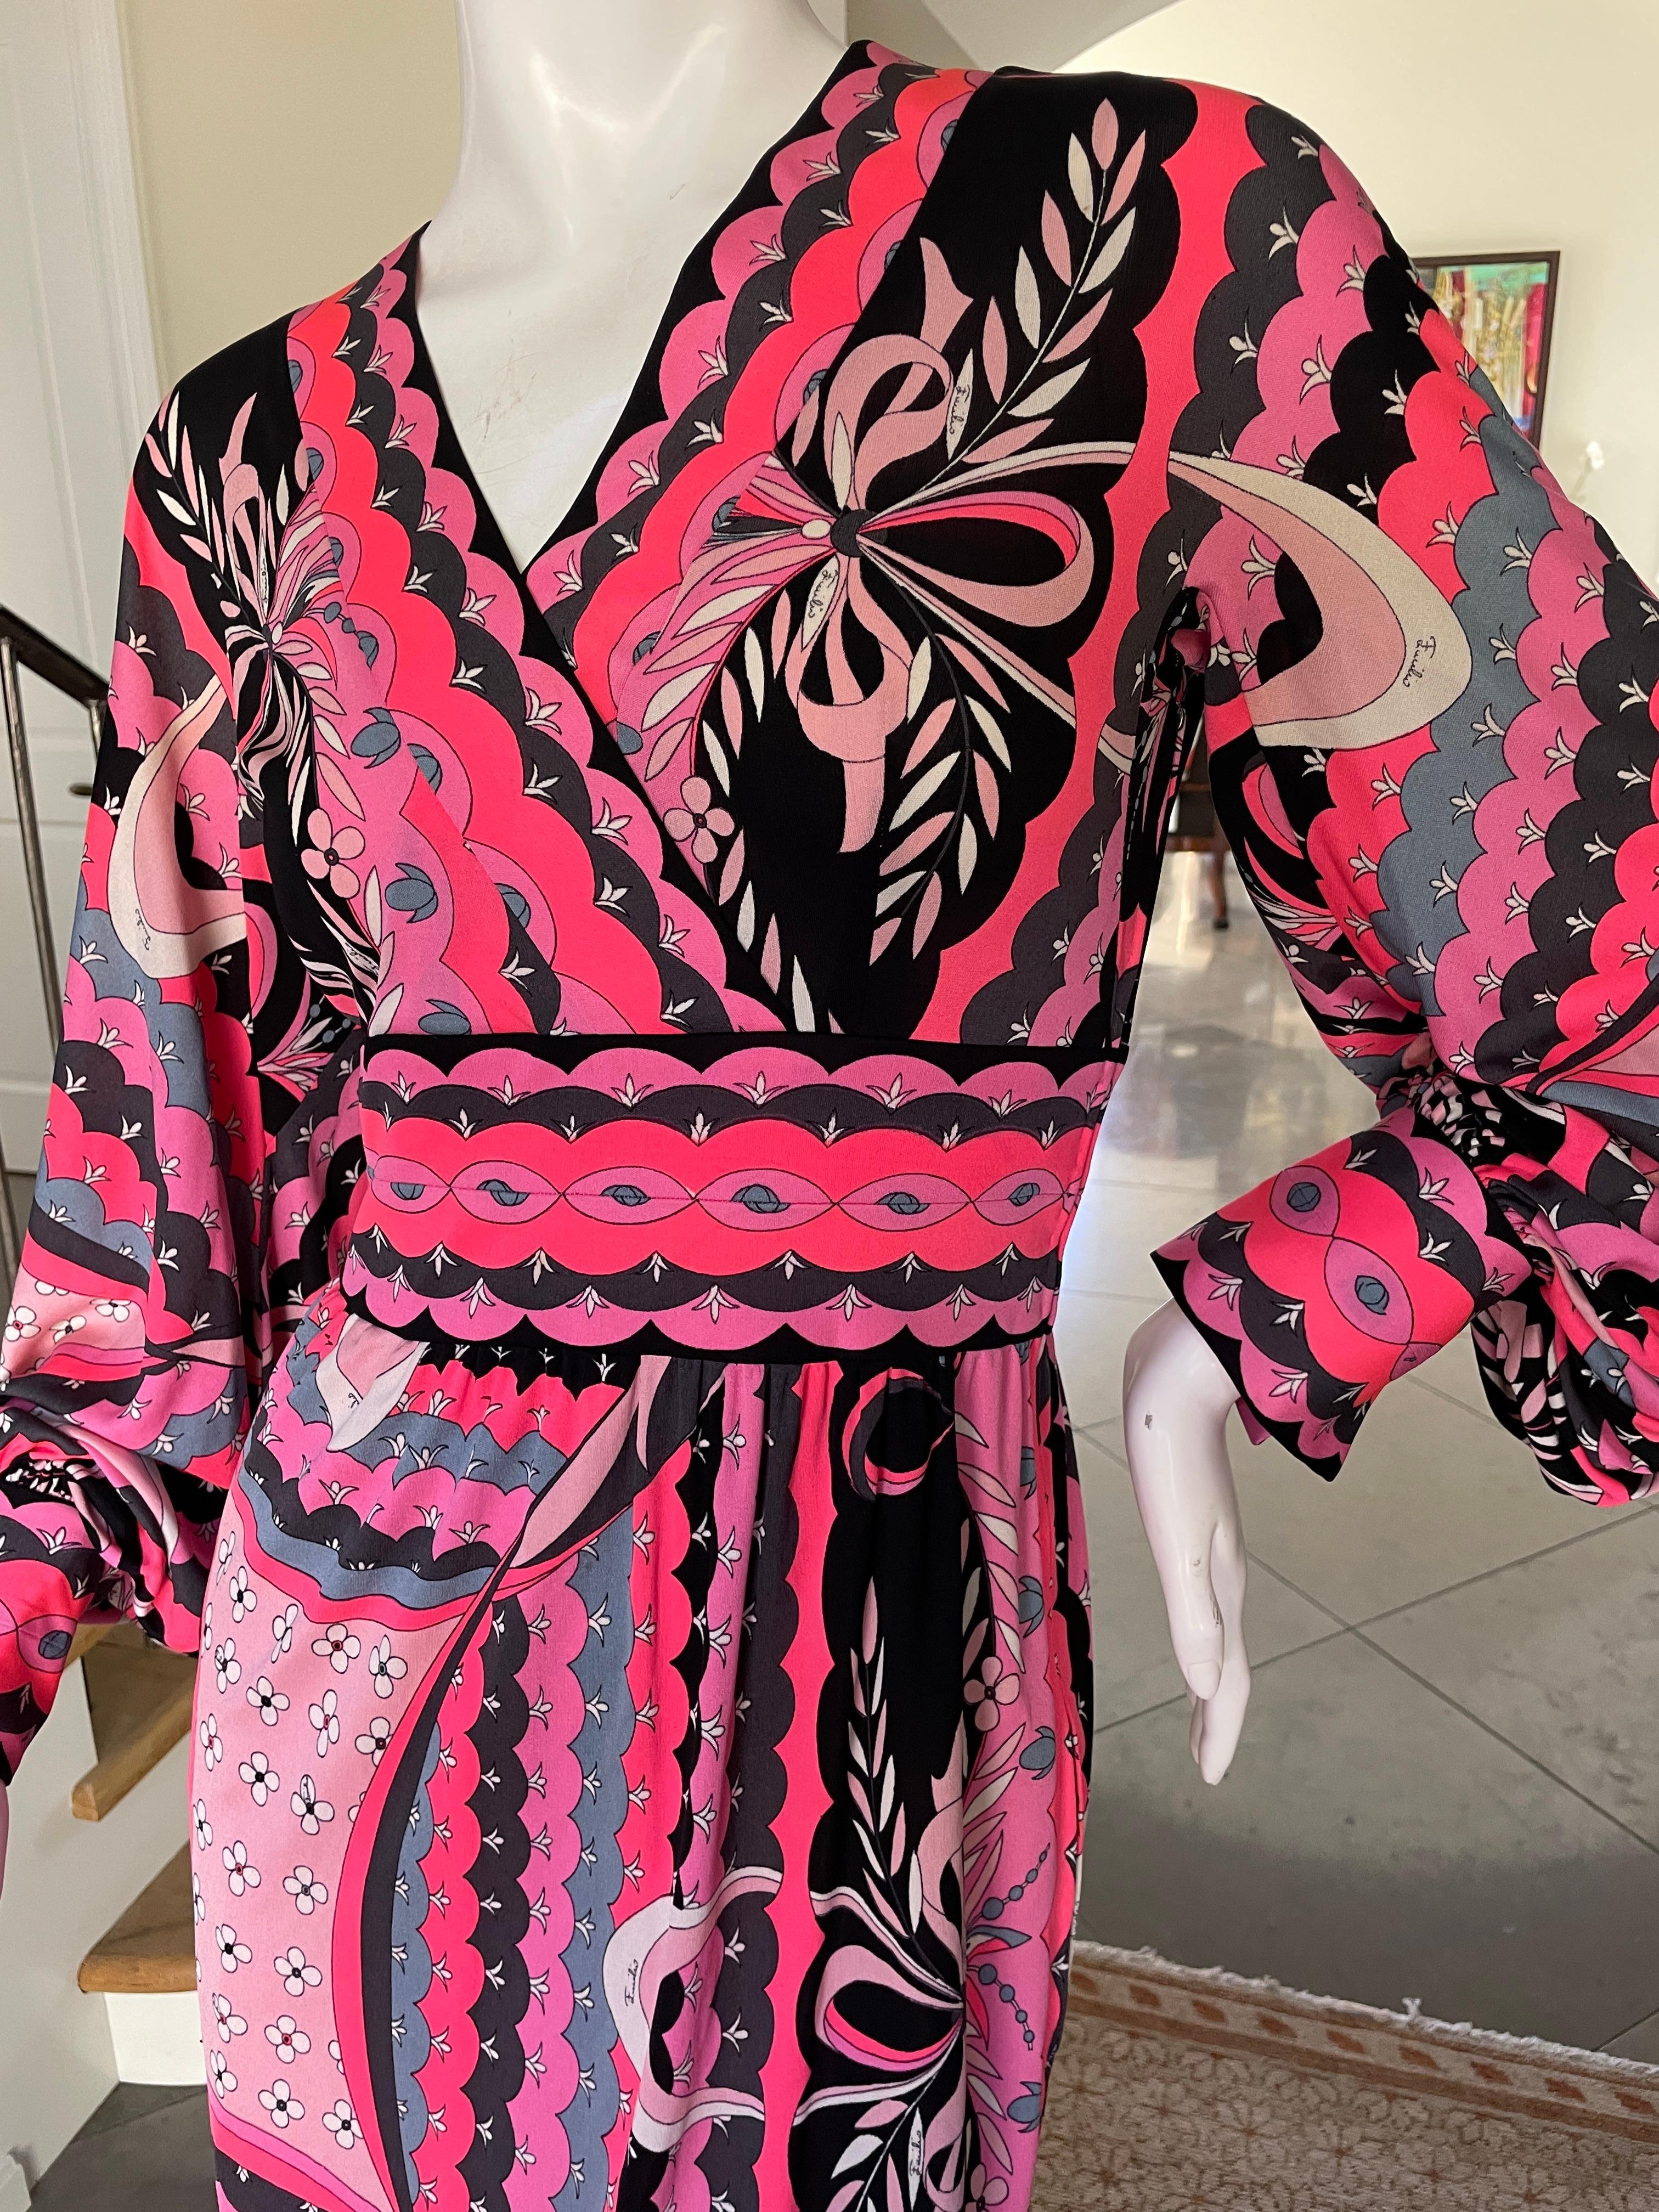 Emilio Pucci Vintage 1960's Silk Jersey Dress from Saks Fifth Avenue 2